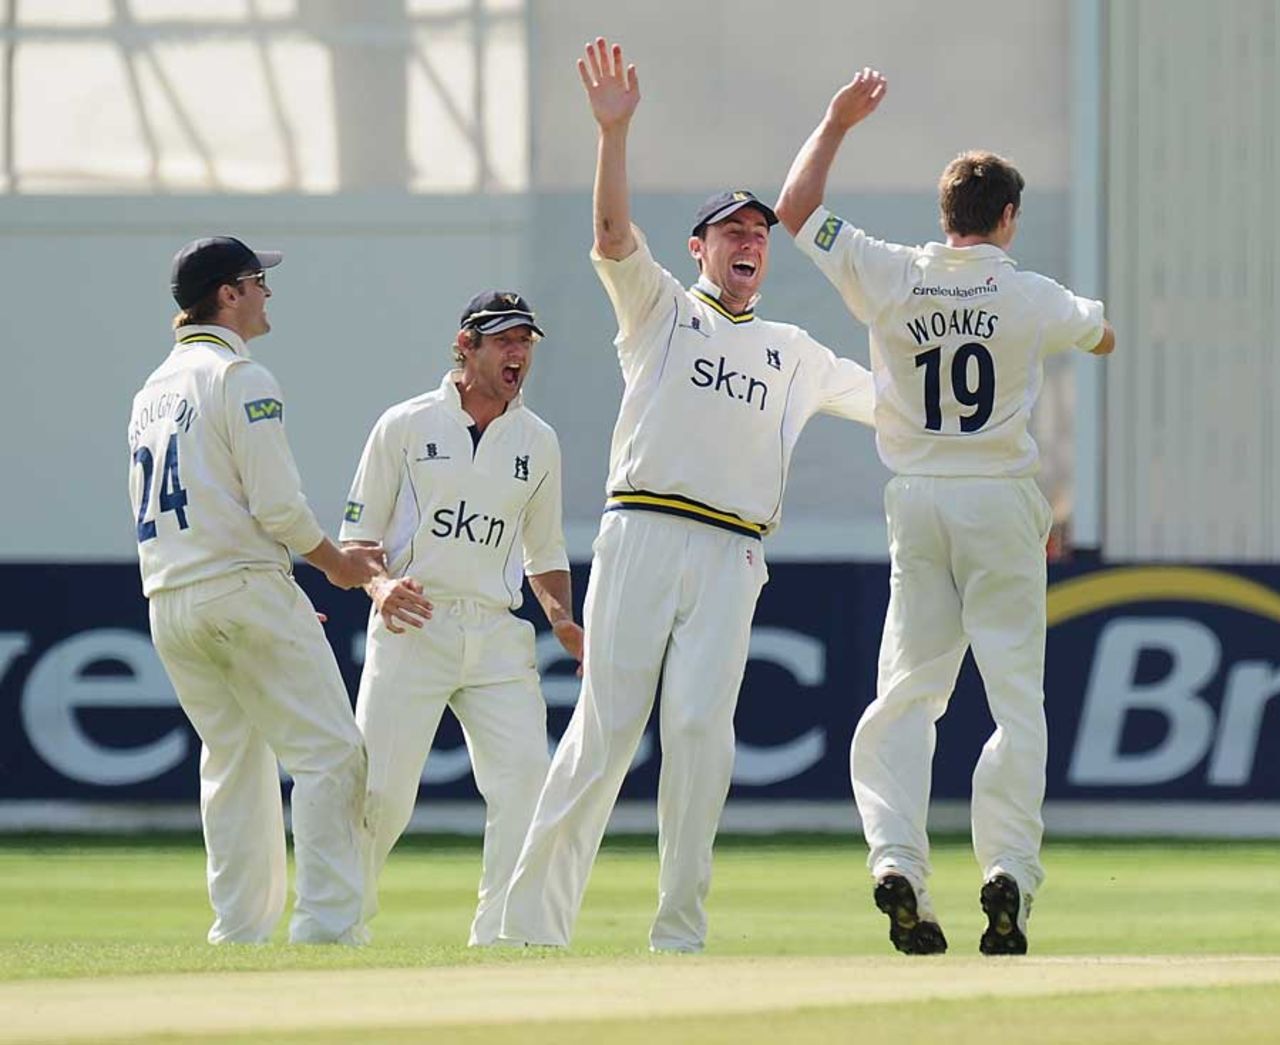 Chris Woakes ran through Kent's first innings with six wickets, Warwickshire v Kent, County Championship, Division One, Edgbaston, September 1, 2010